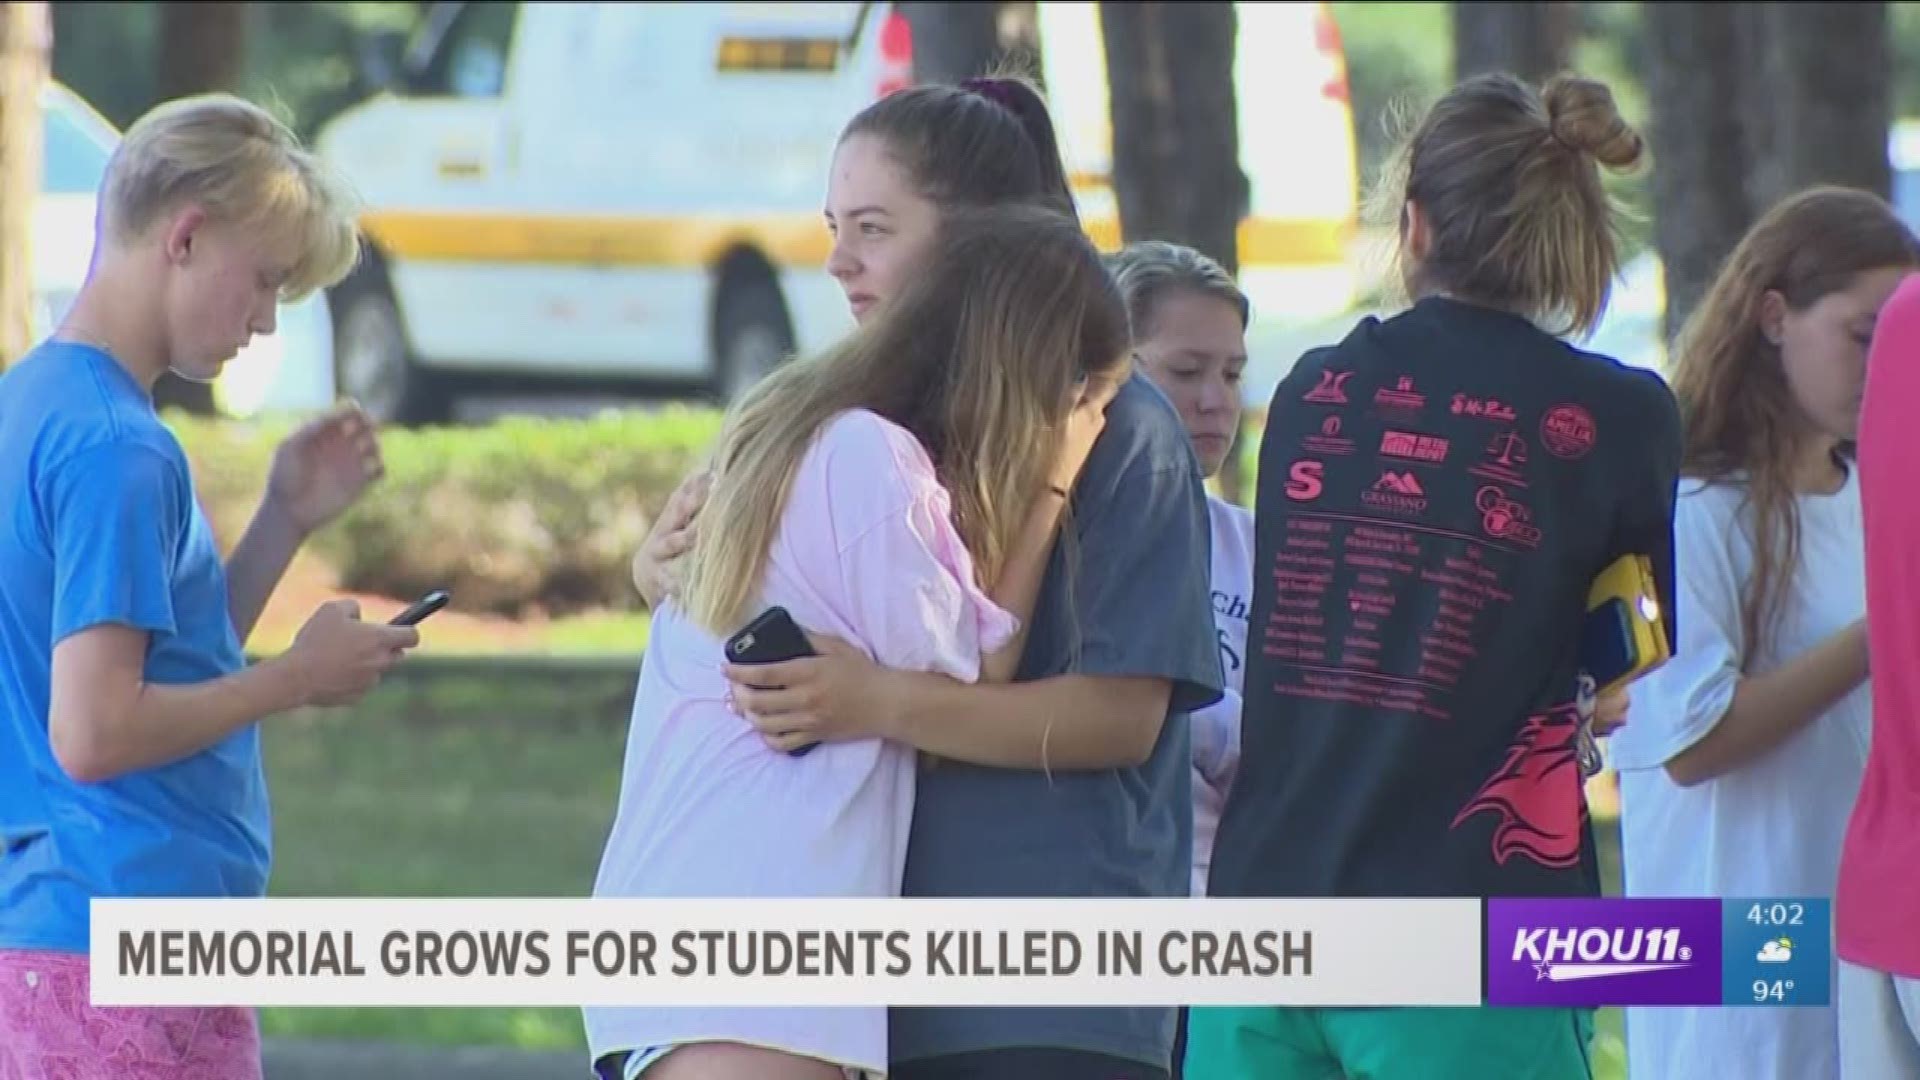 Two 16 year old girls were killed and a 17 year old boy was charged with intoxication manslaughter after a tragic accident early Wednesday morning. 